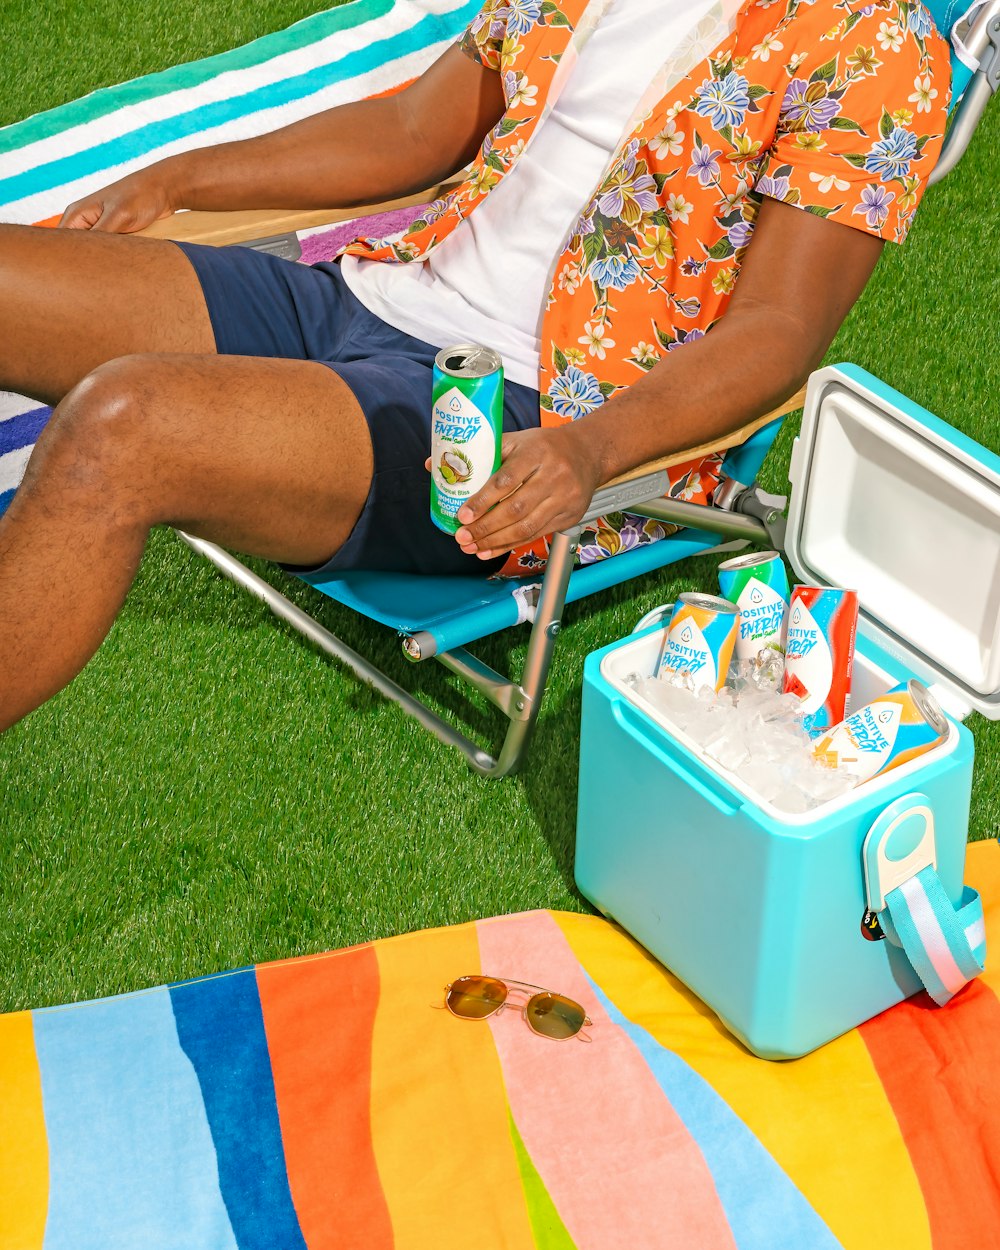 a man sitting in a lawn chair next to a cooler